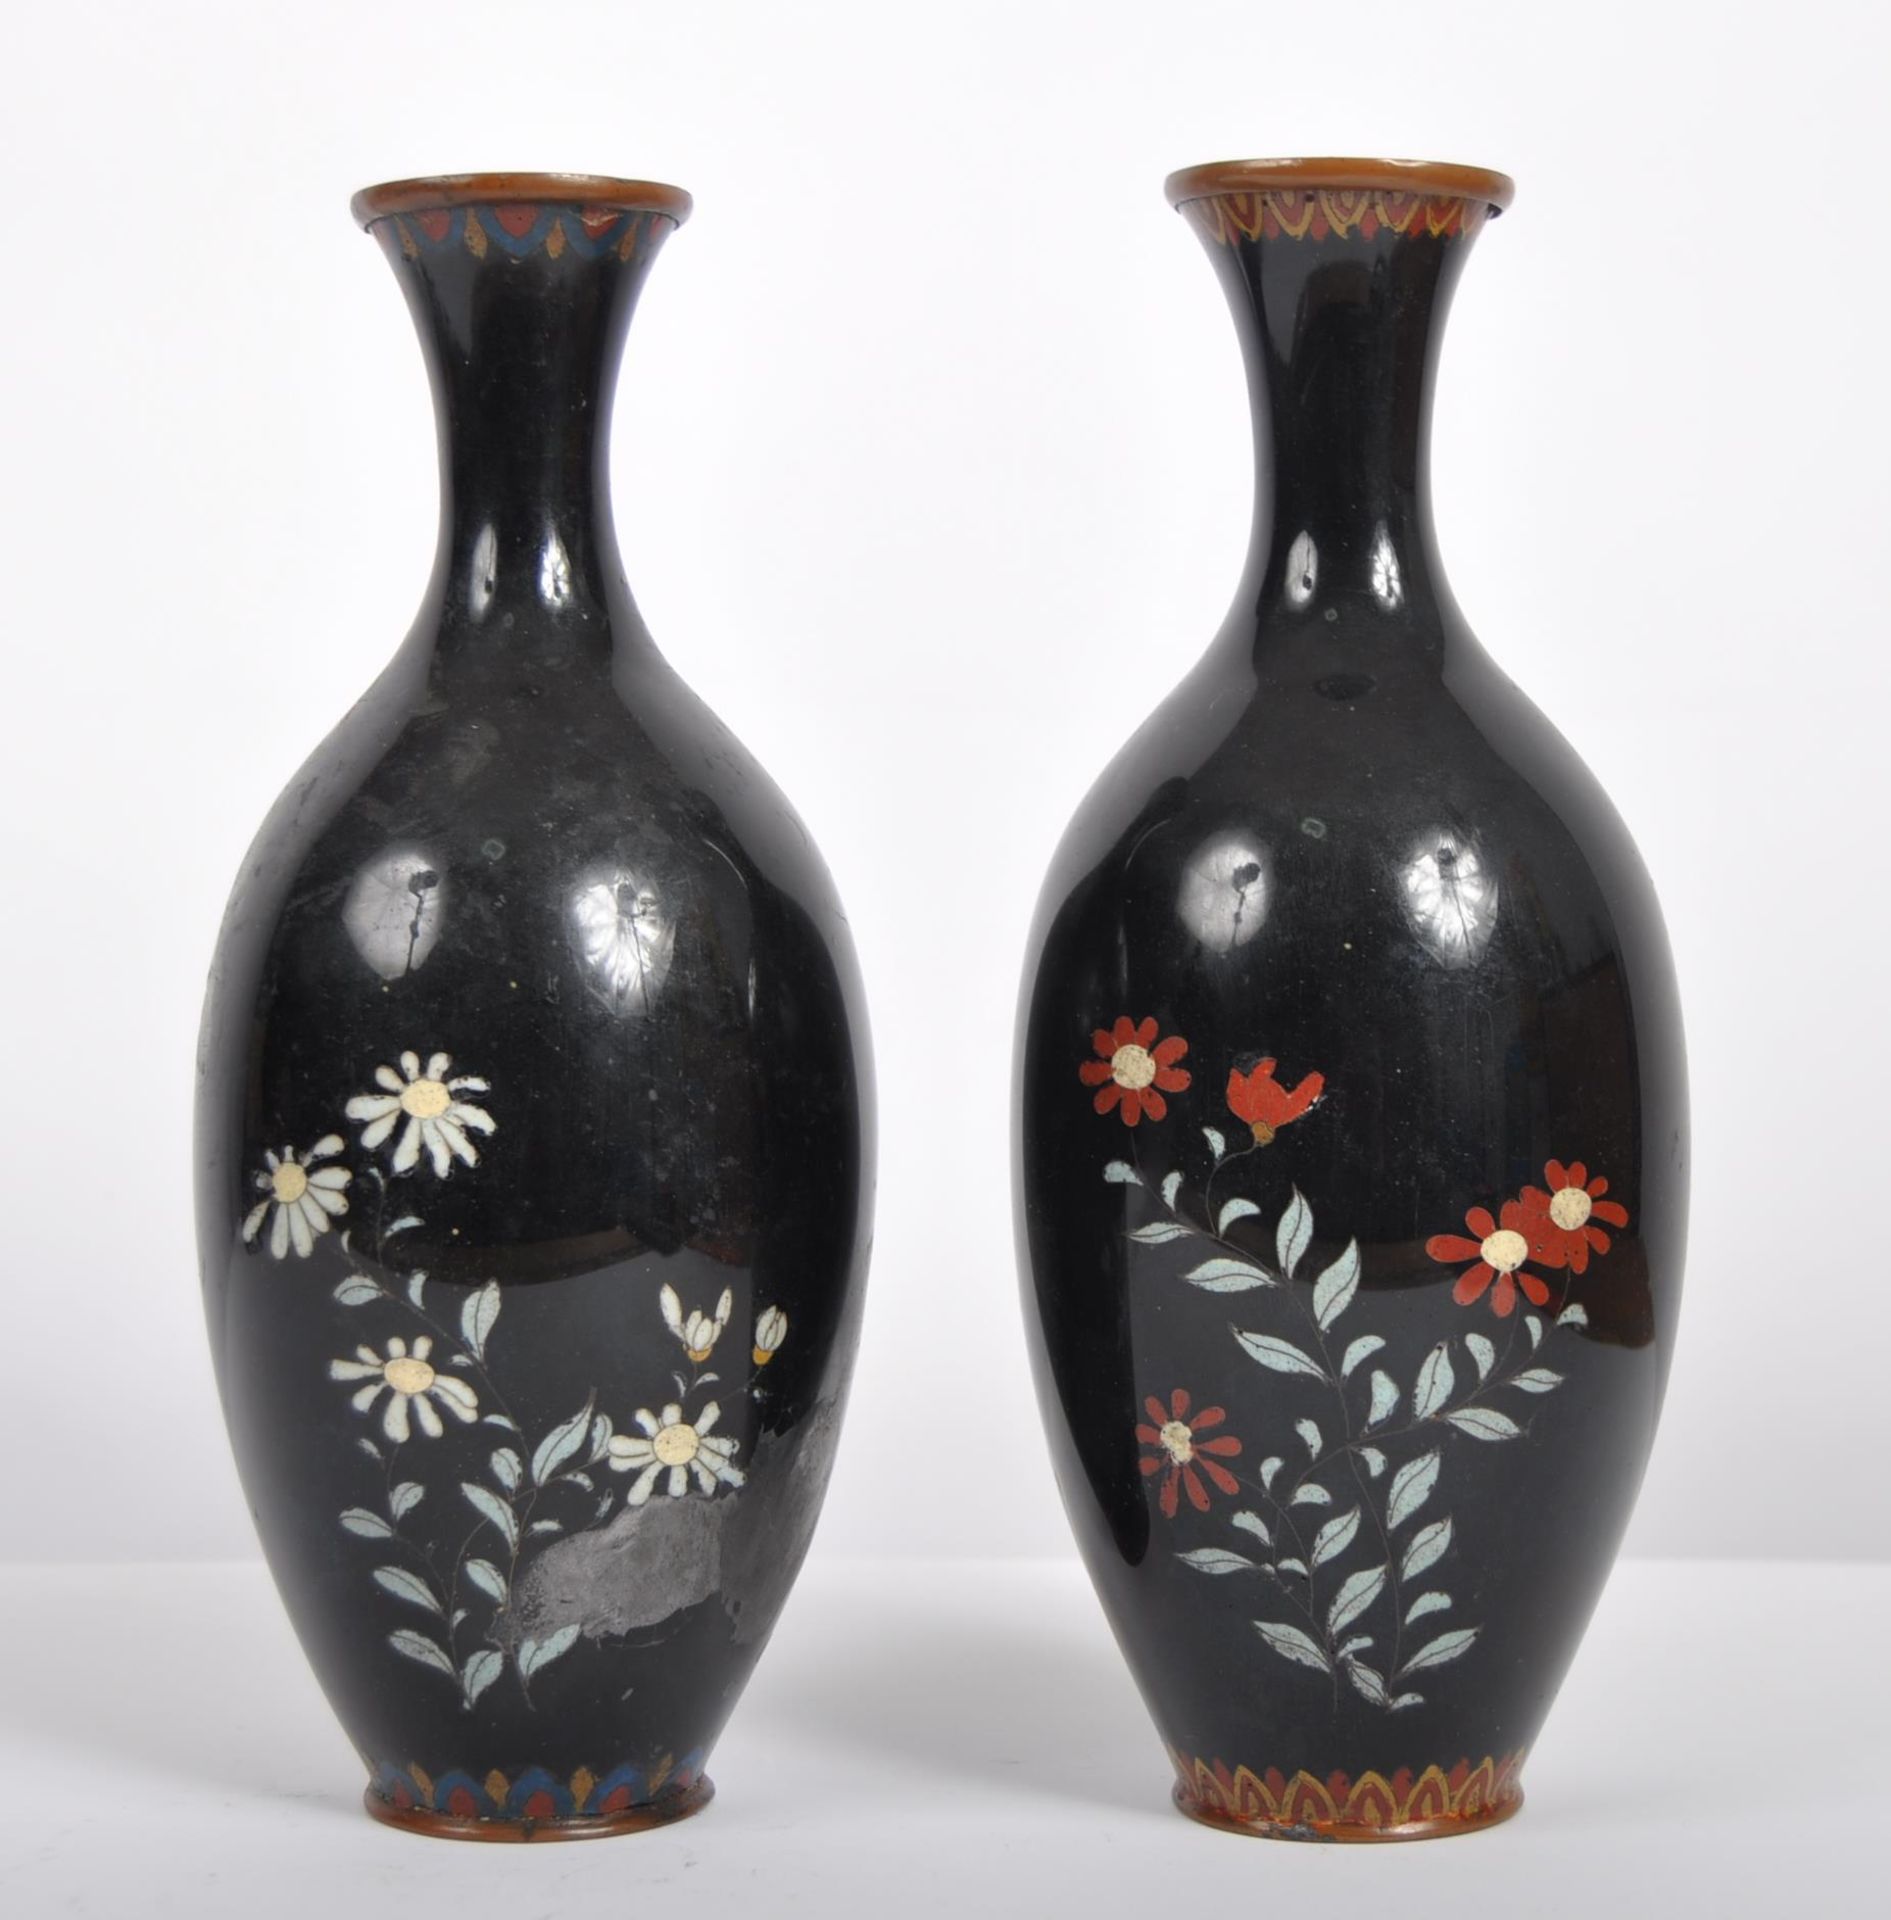 PAIR OF 20TH CENTURY CHINESE CLOISONNE VASES - Image 3 of 6